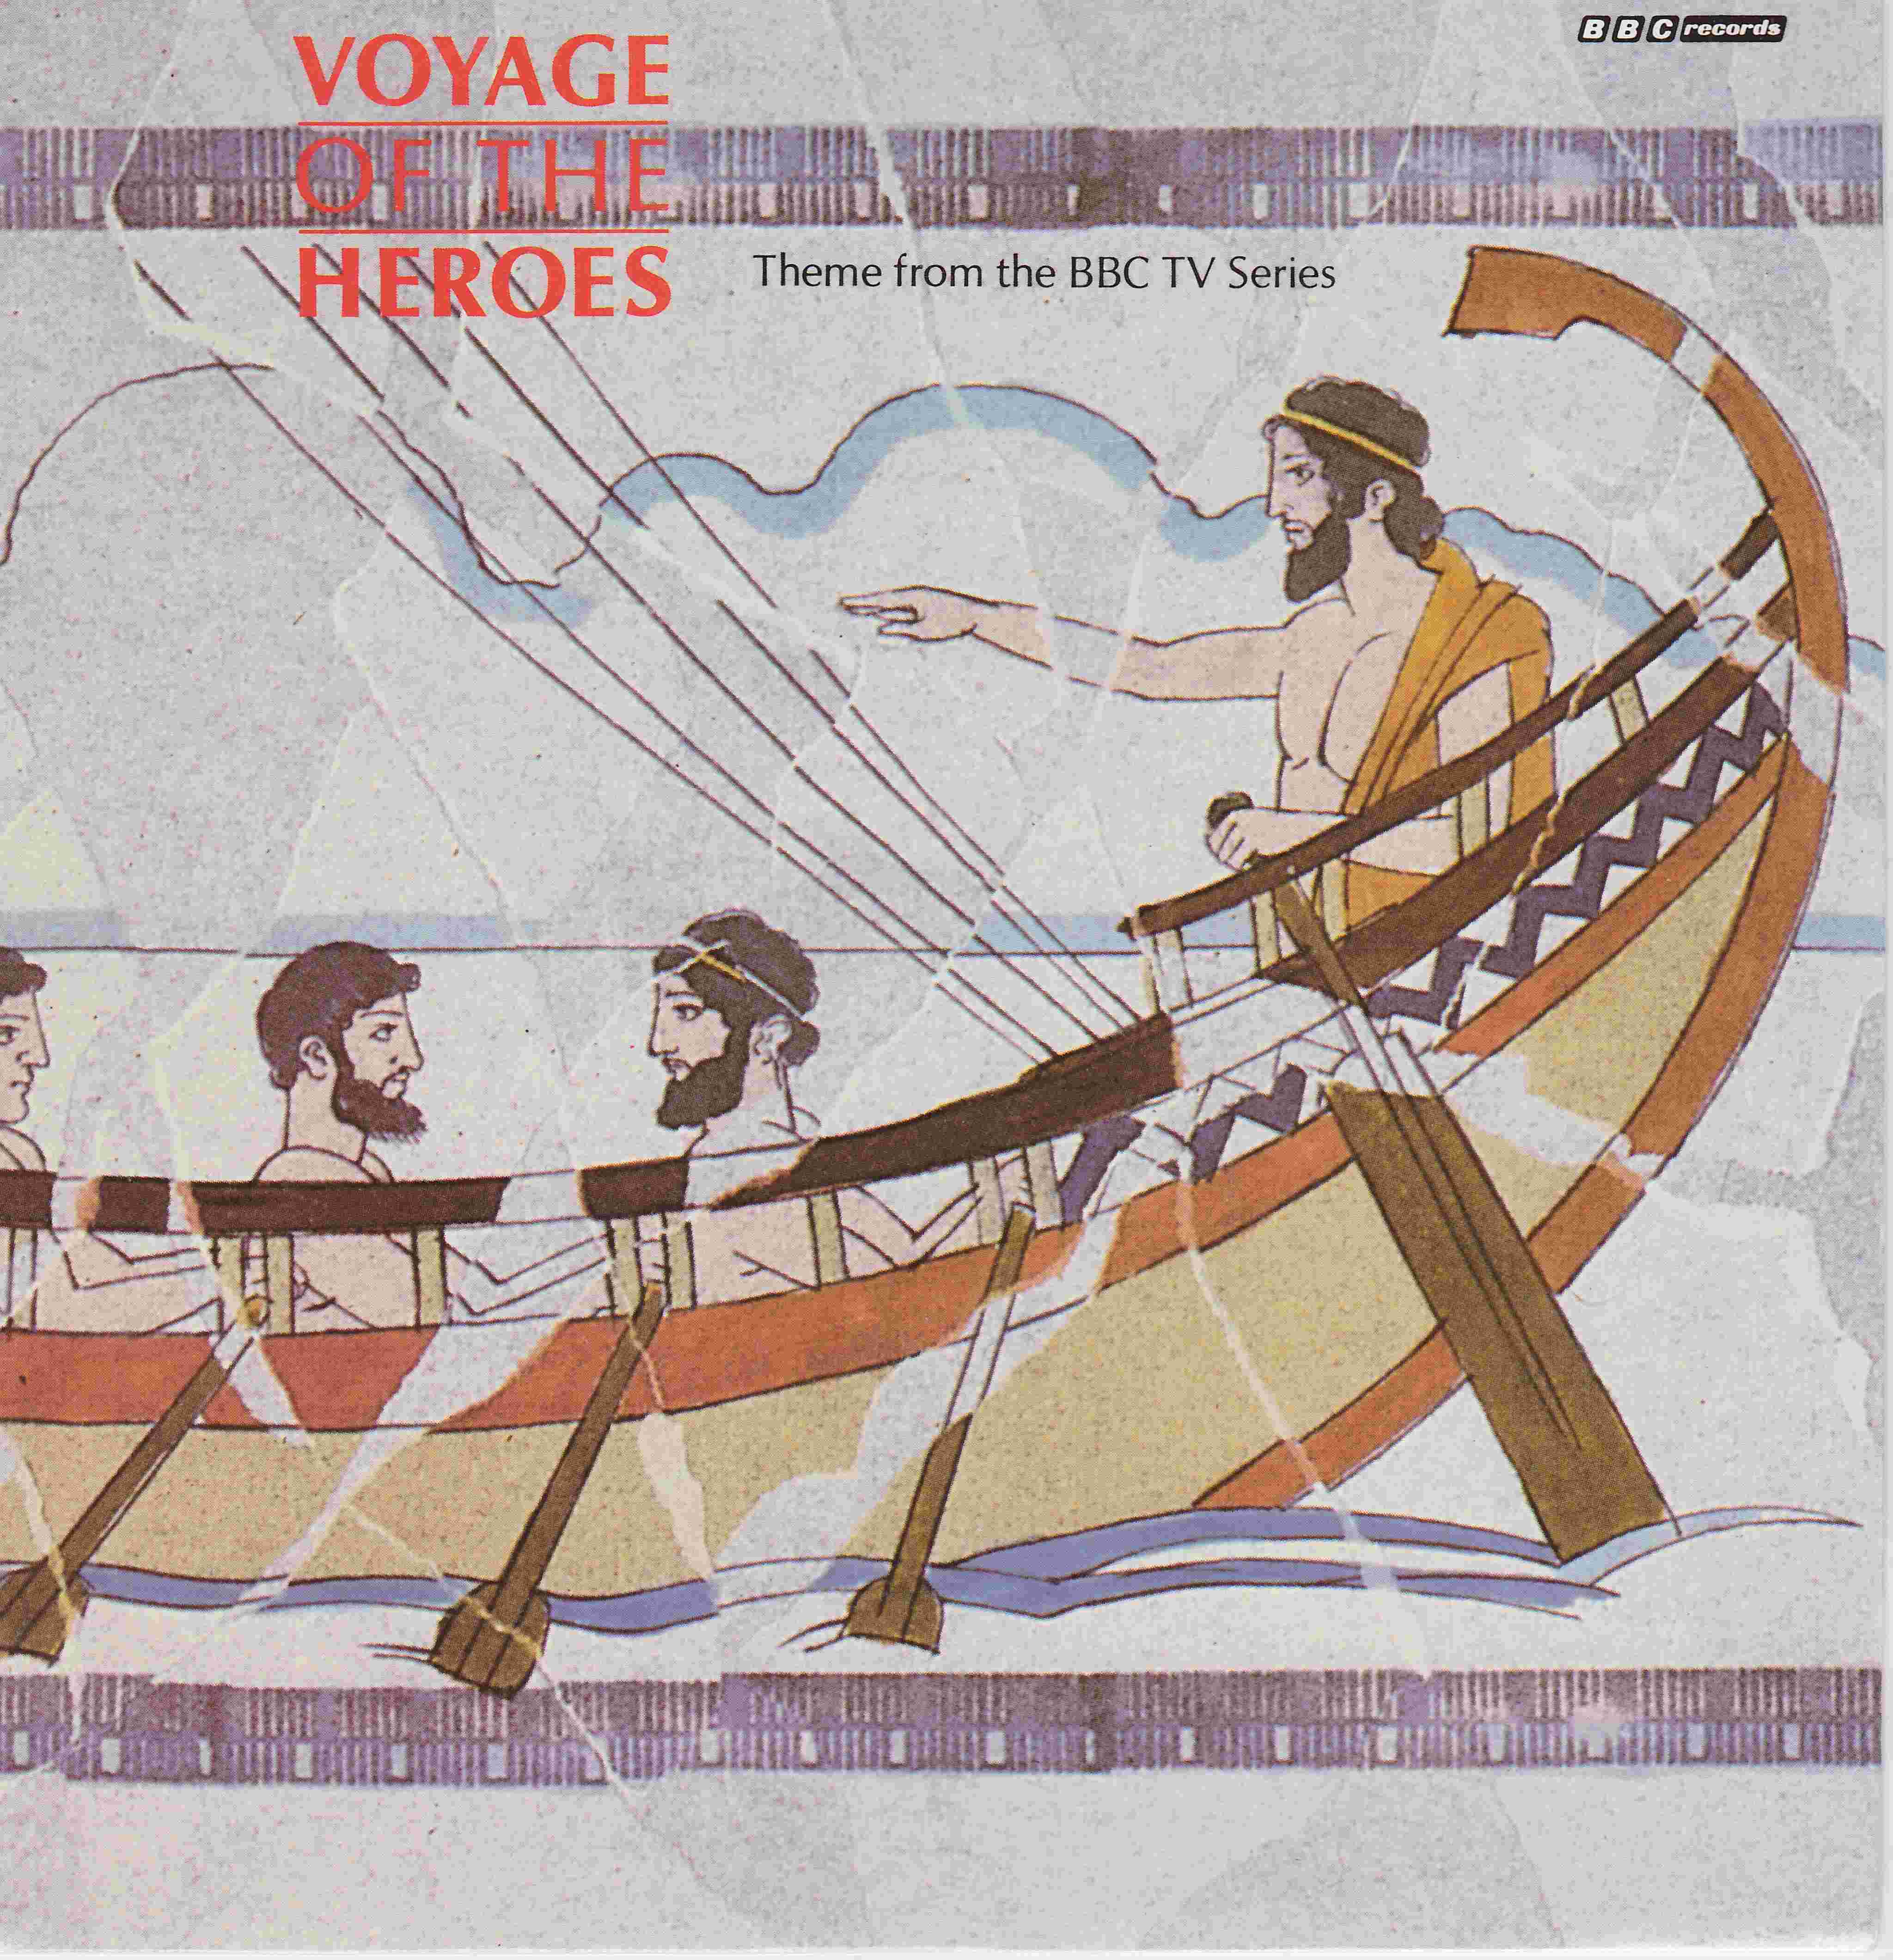 Picture of RESL 169 Voyage of the heroes (Closing theme) by artist Howard Davidson from the BBC records and Tapes library